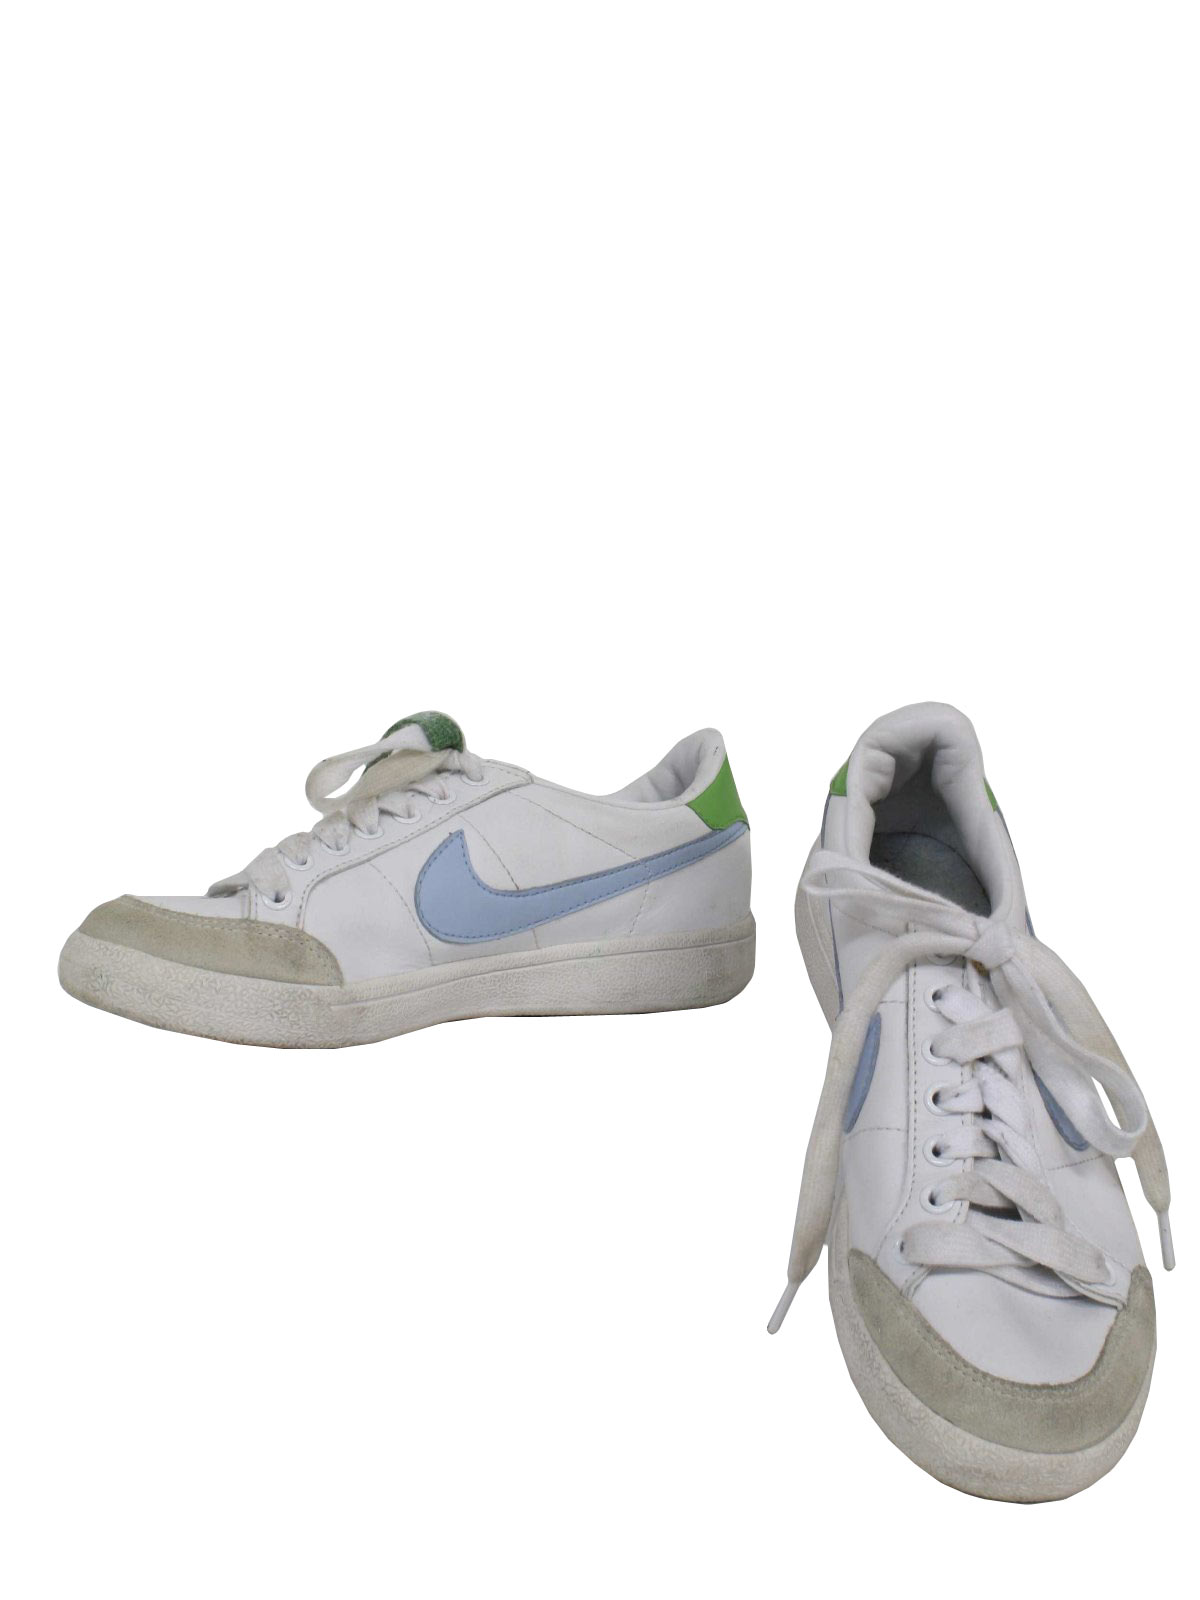 white nike with light blue swoosh